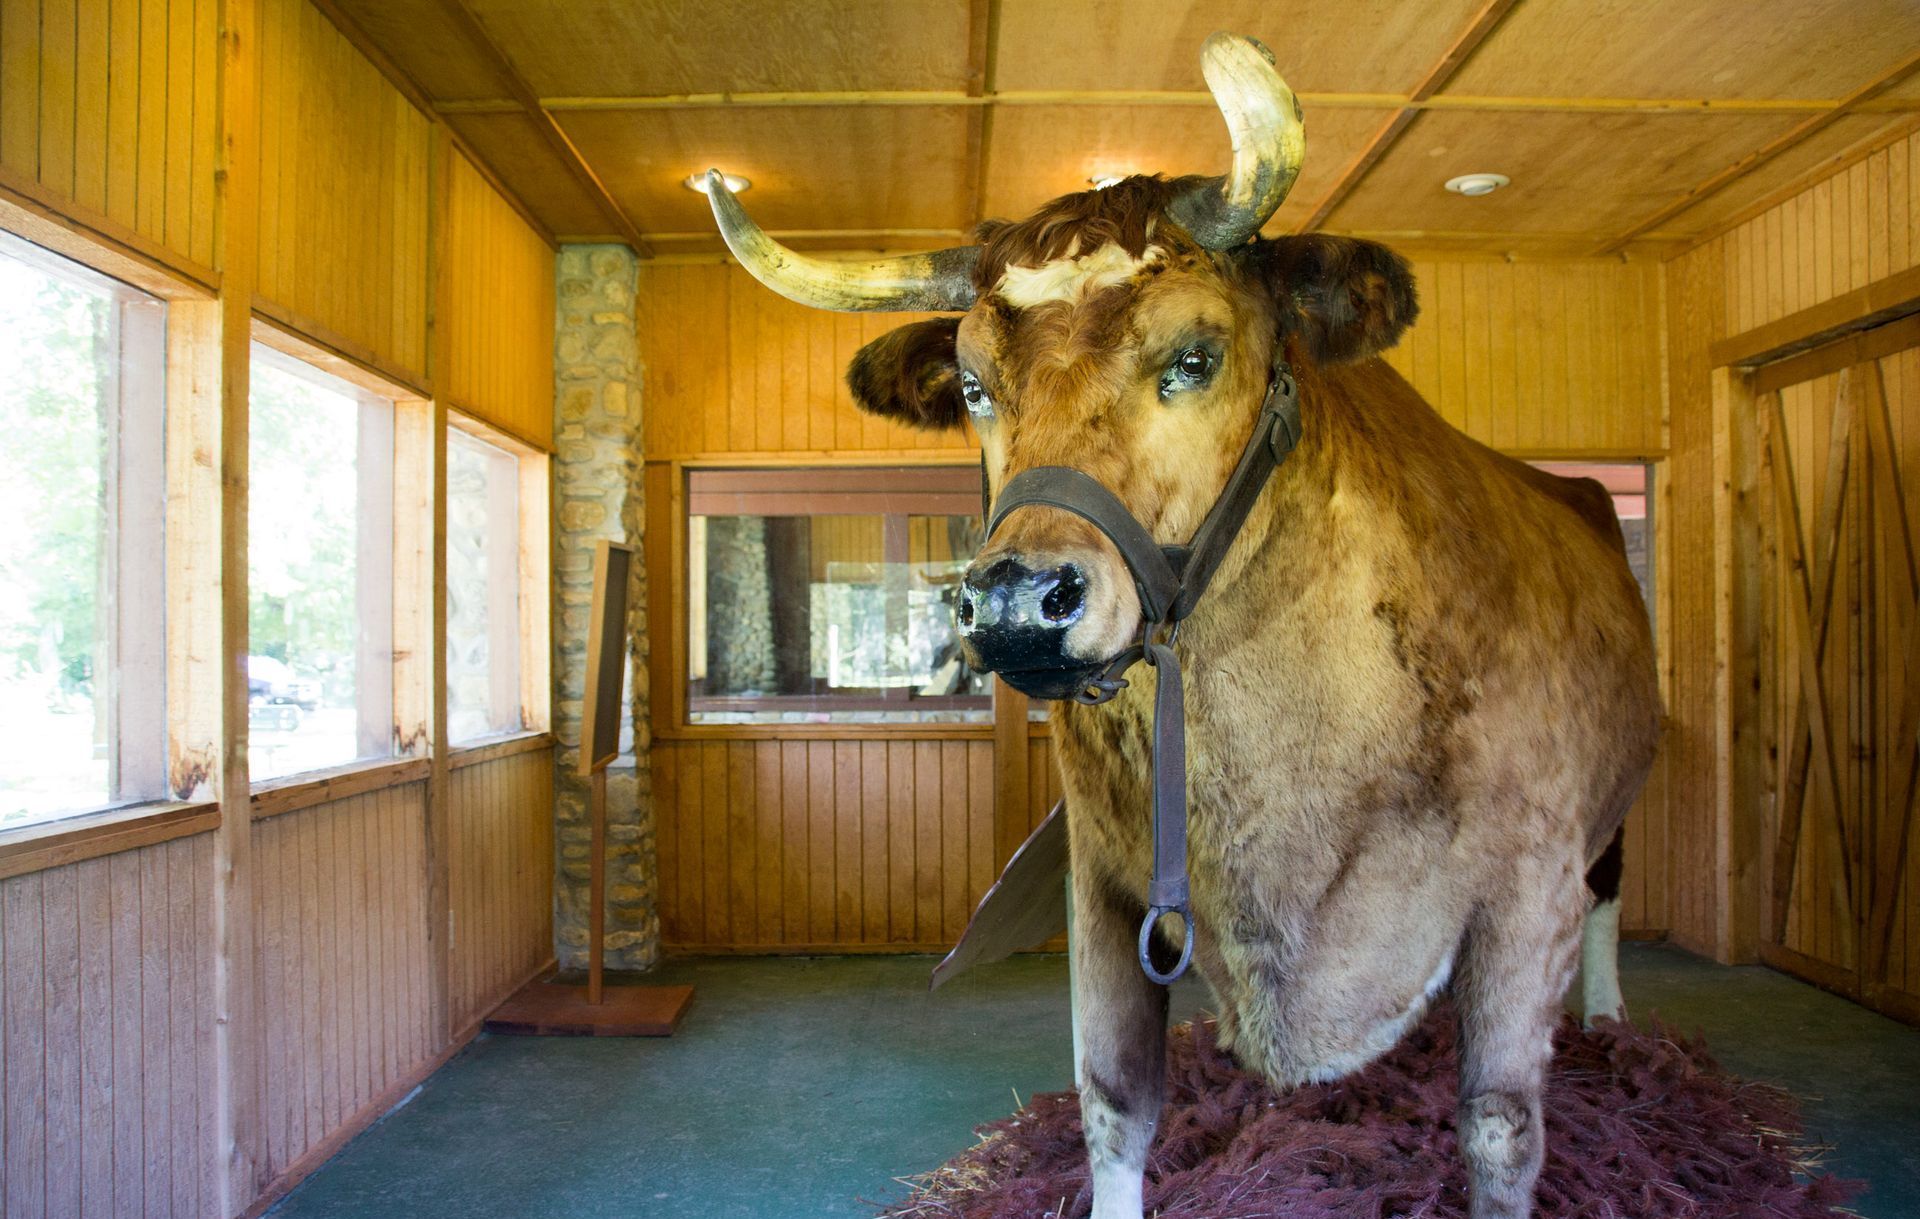 World's Largest Preserved Steer: world record in Kokomo, Indiana